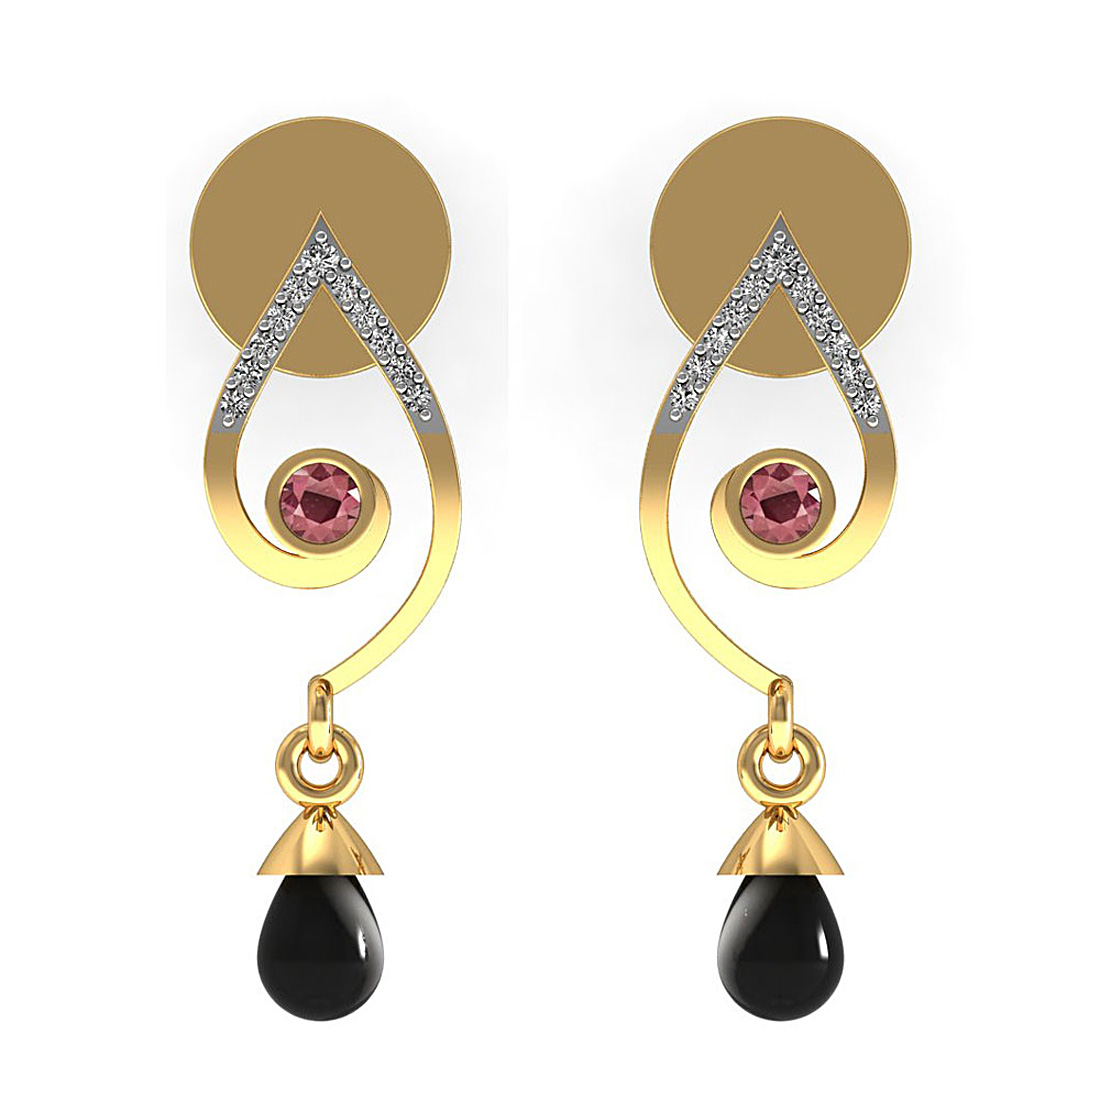 Diamond & onyx drop stud earrings made in 18k gold with ruby